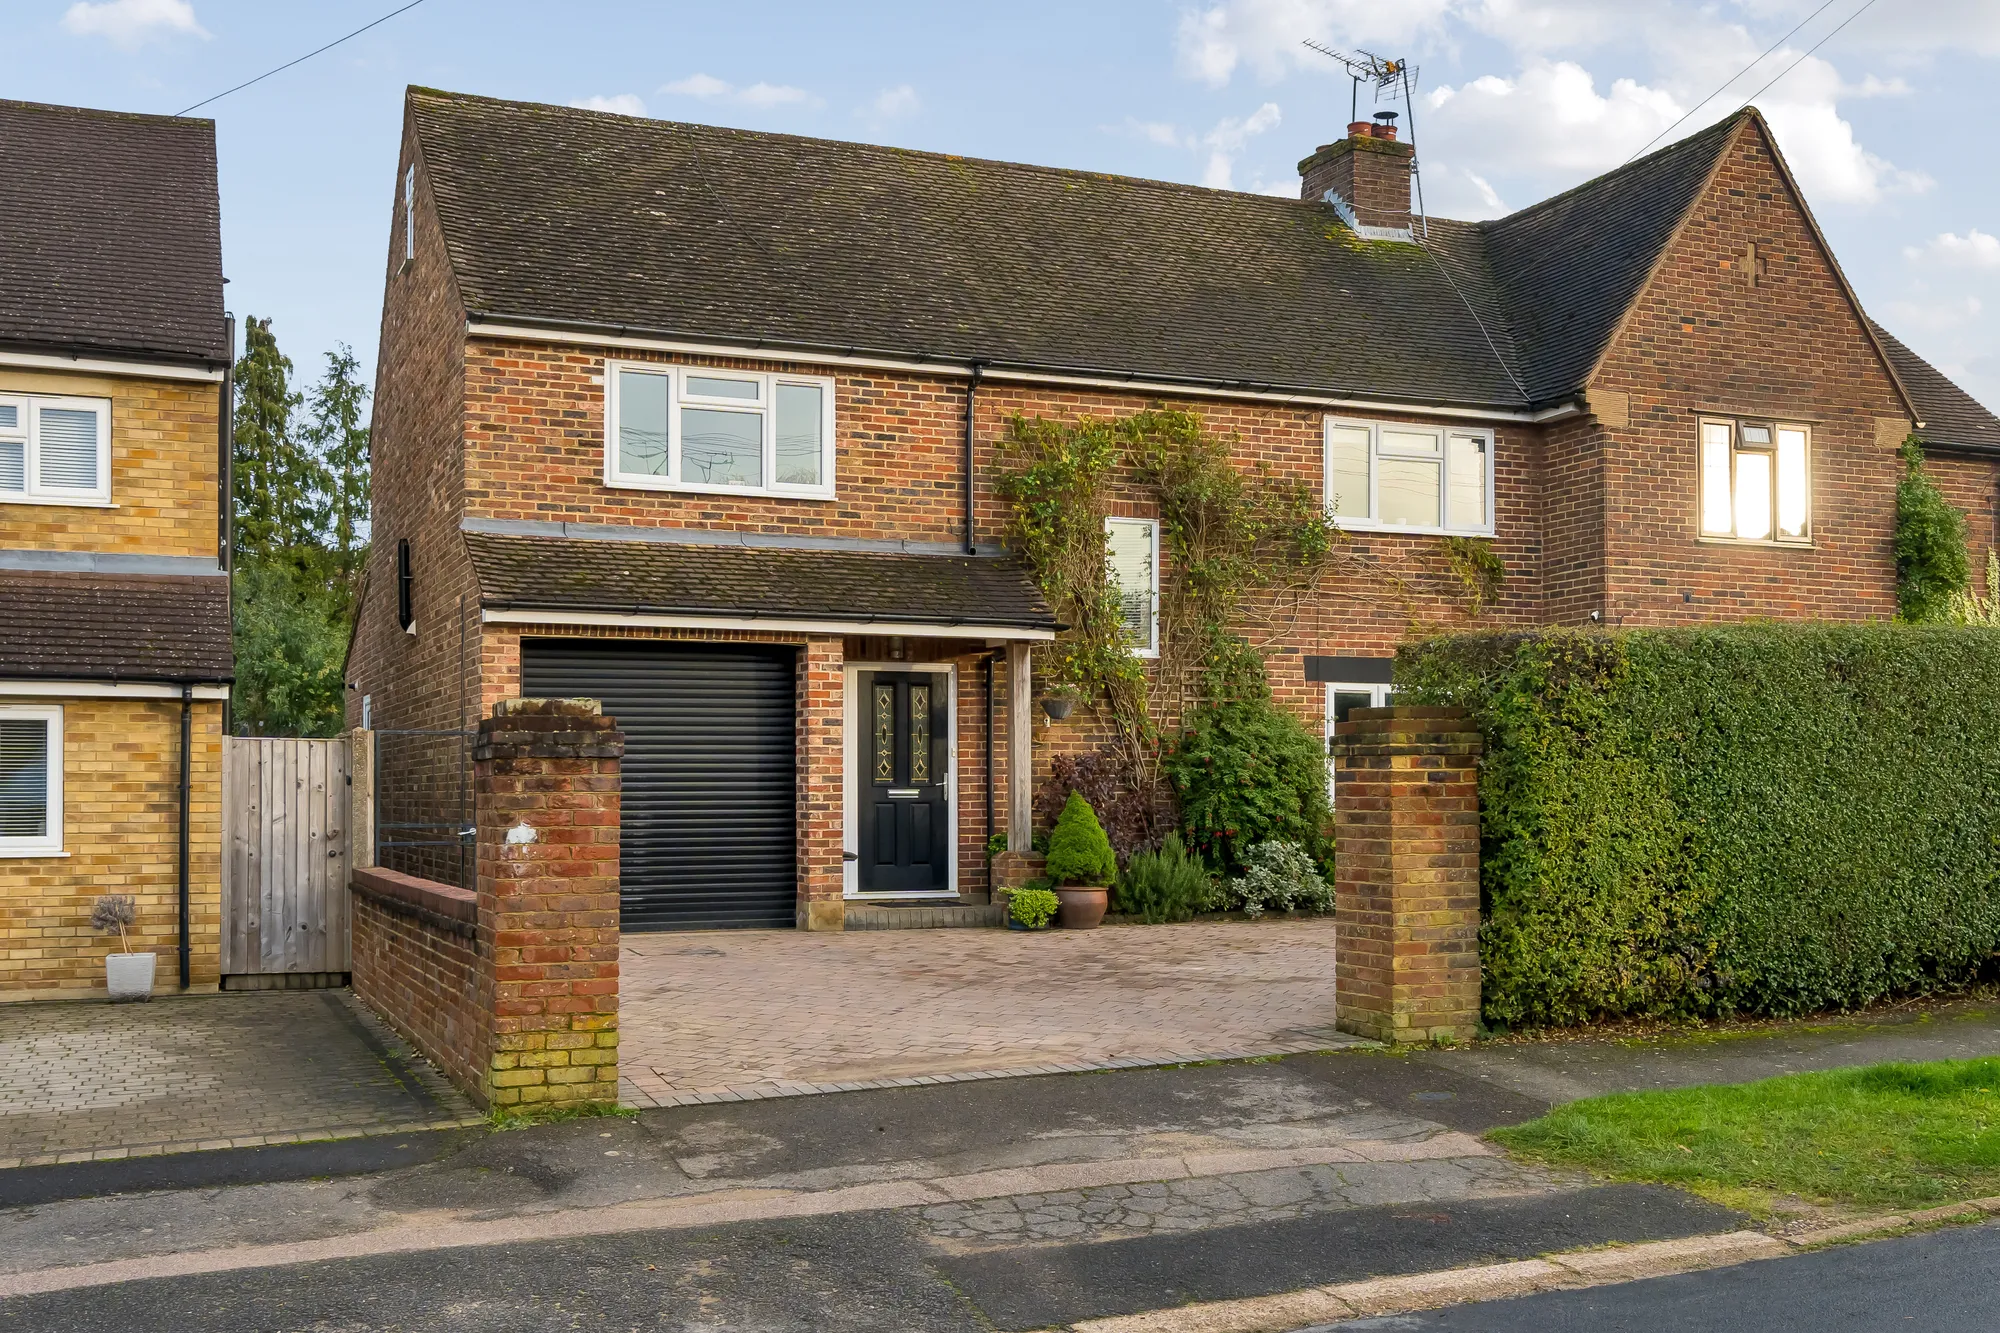 4 bed semi-detached house for sale in Blanchmans Road, Warlingham - Property Image 1